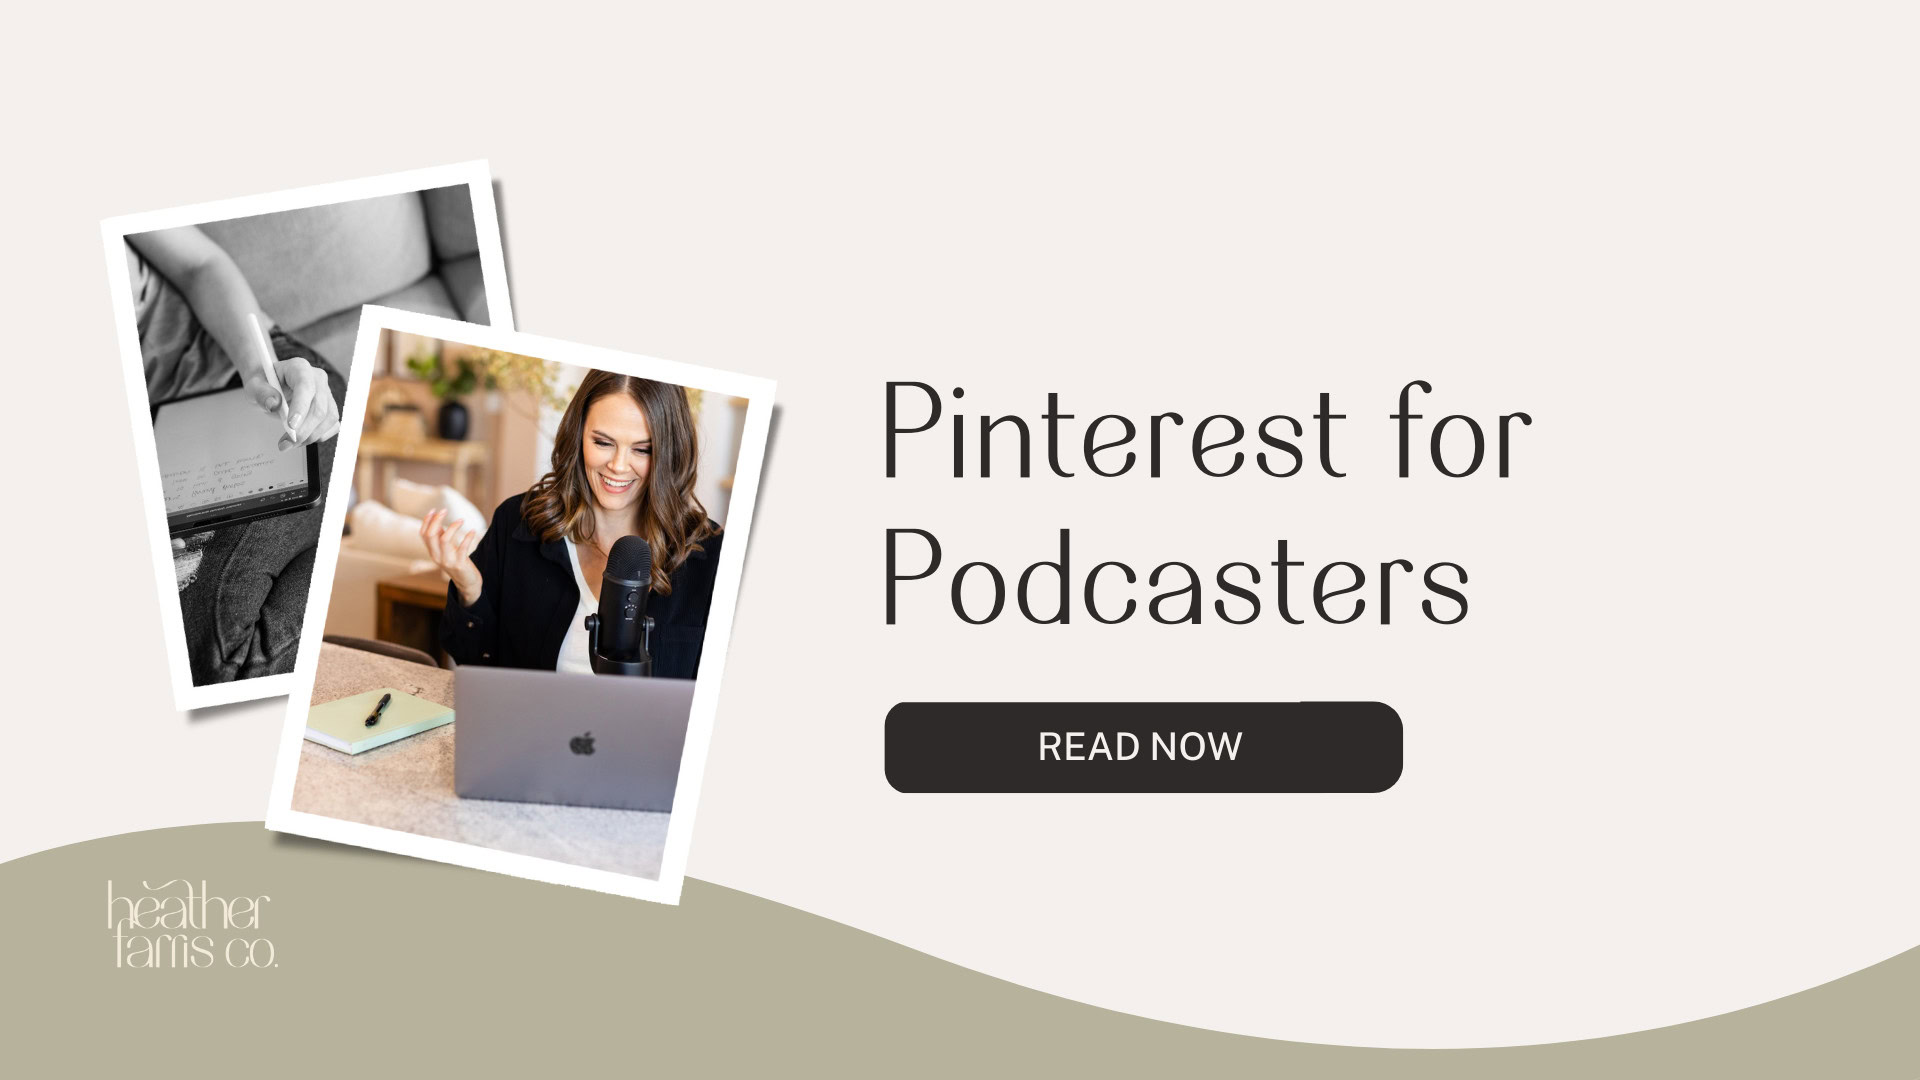 podcast marketing strategy with pinterest